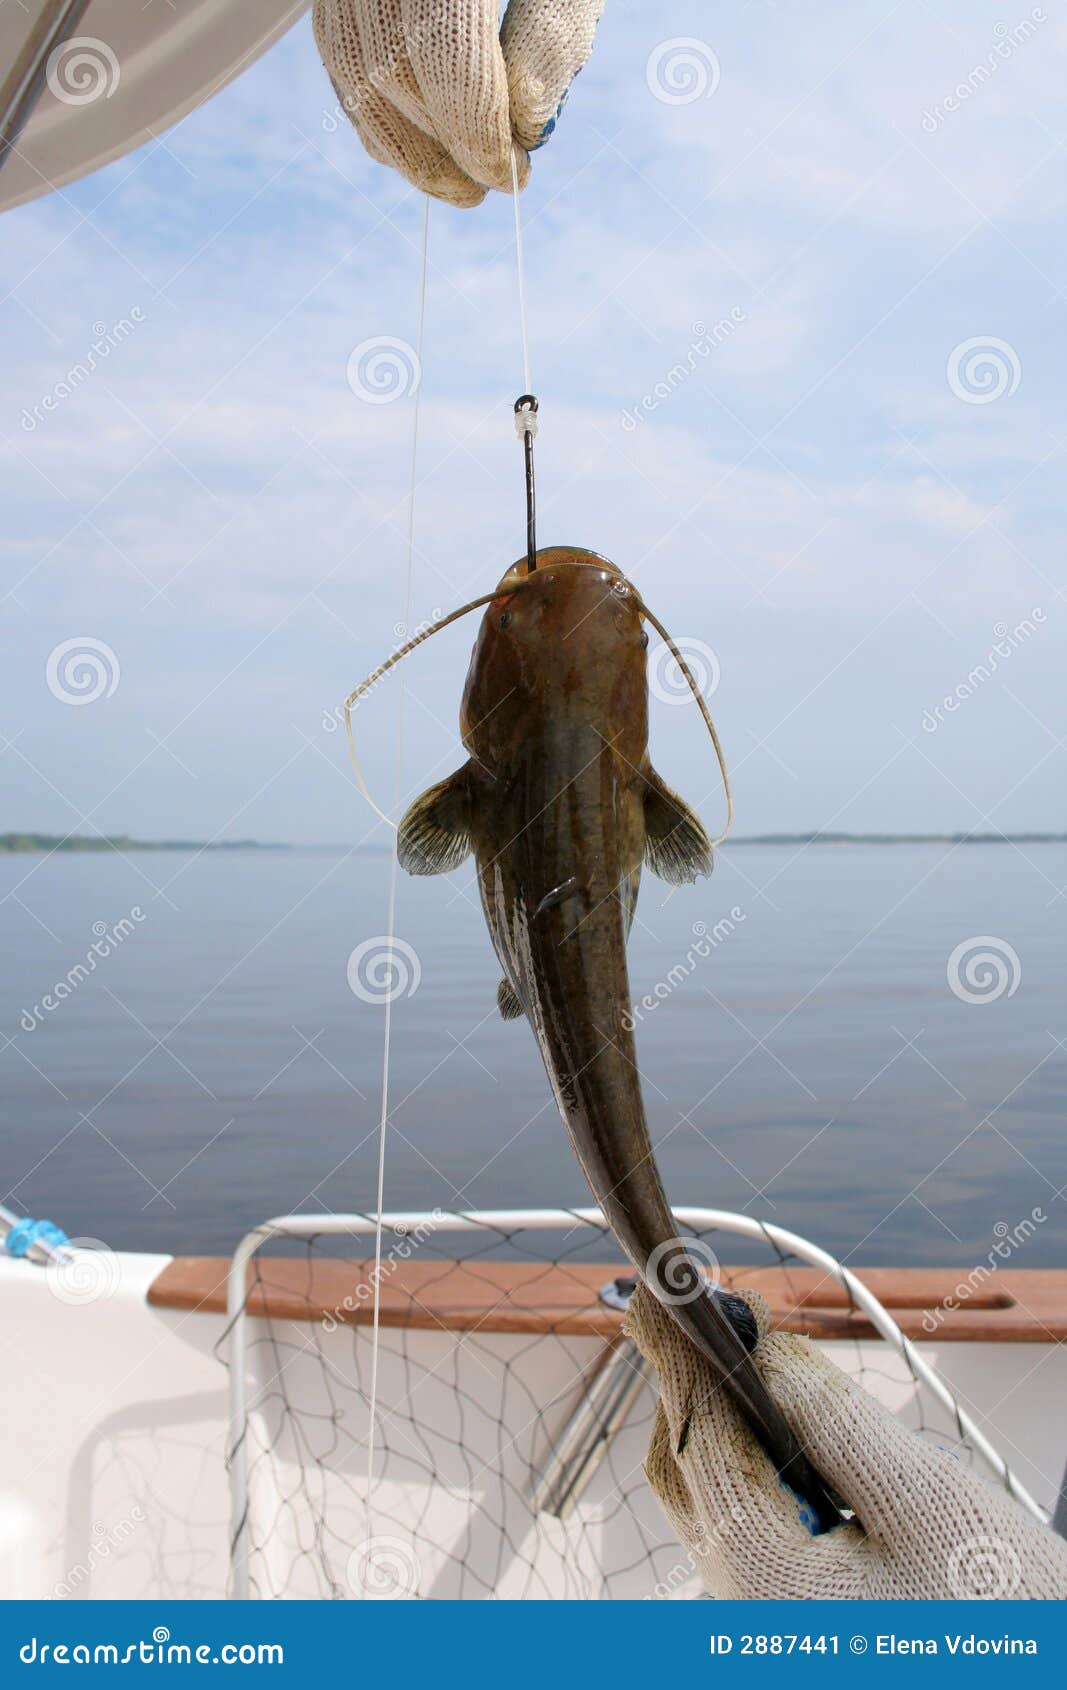 Catfish on a hook stock image. Image of water, hold, pole - 2887441